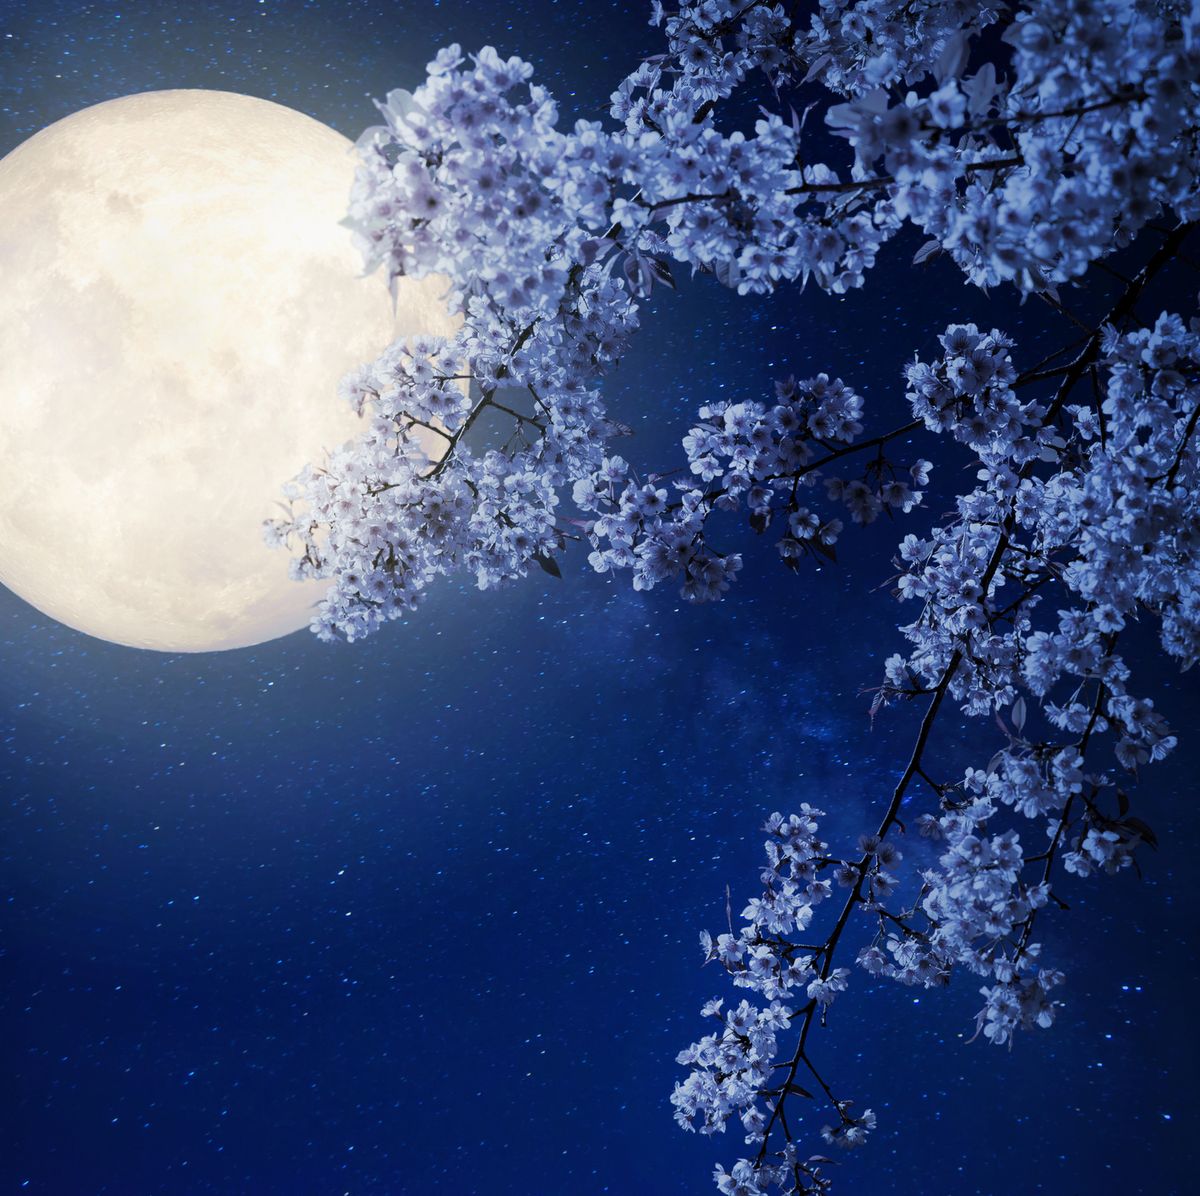 10 Night-Blooming Flowers for a Magical Moon Garden - Live Love Fruit